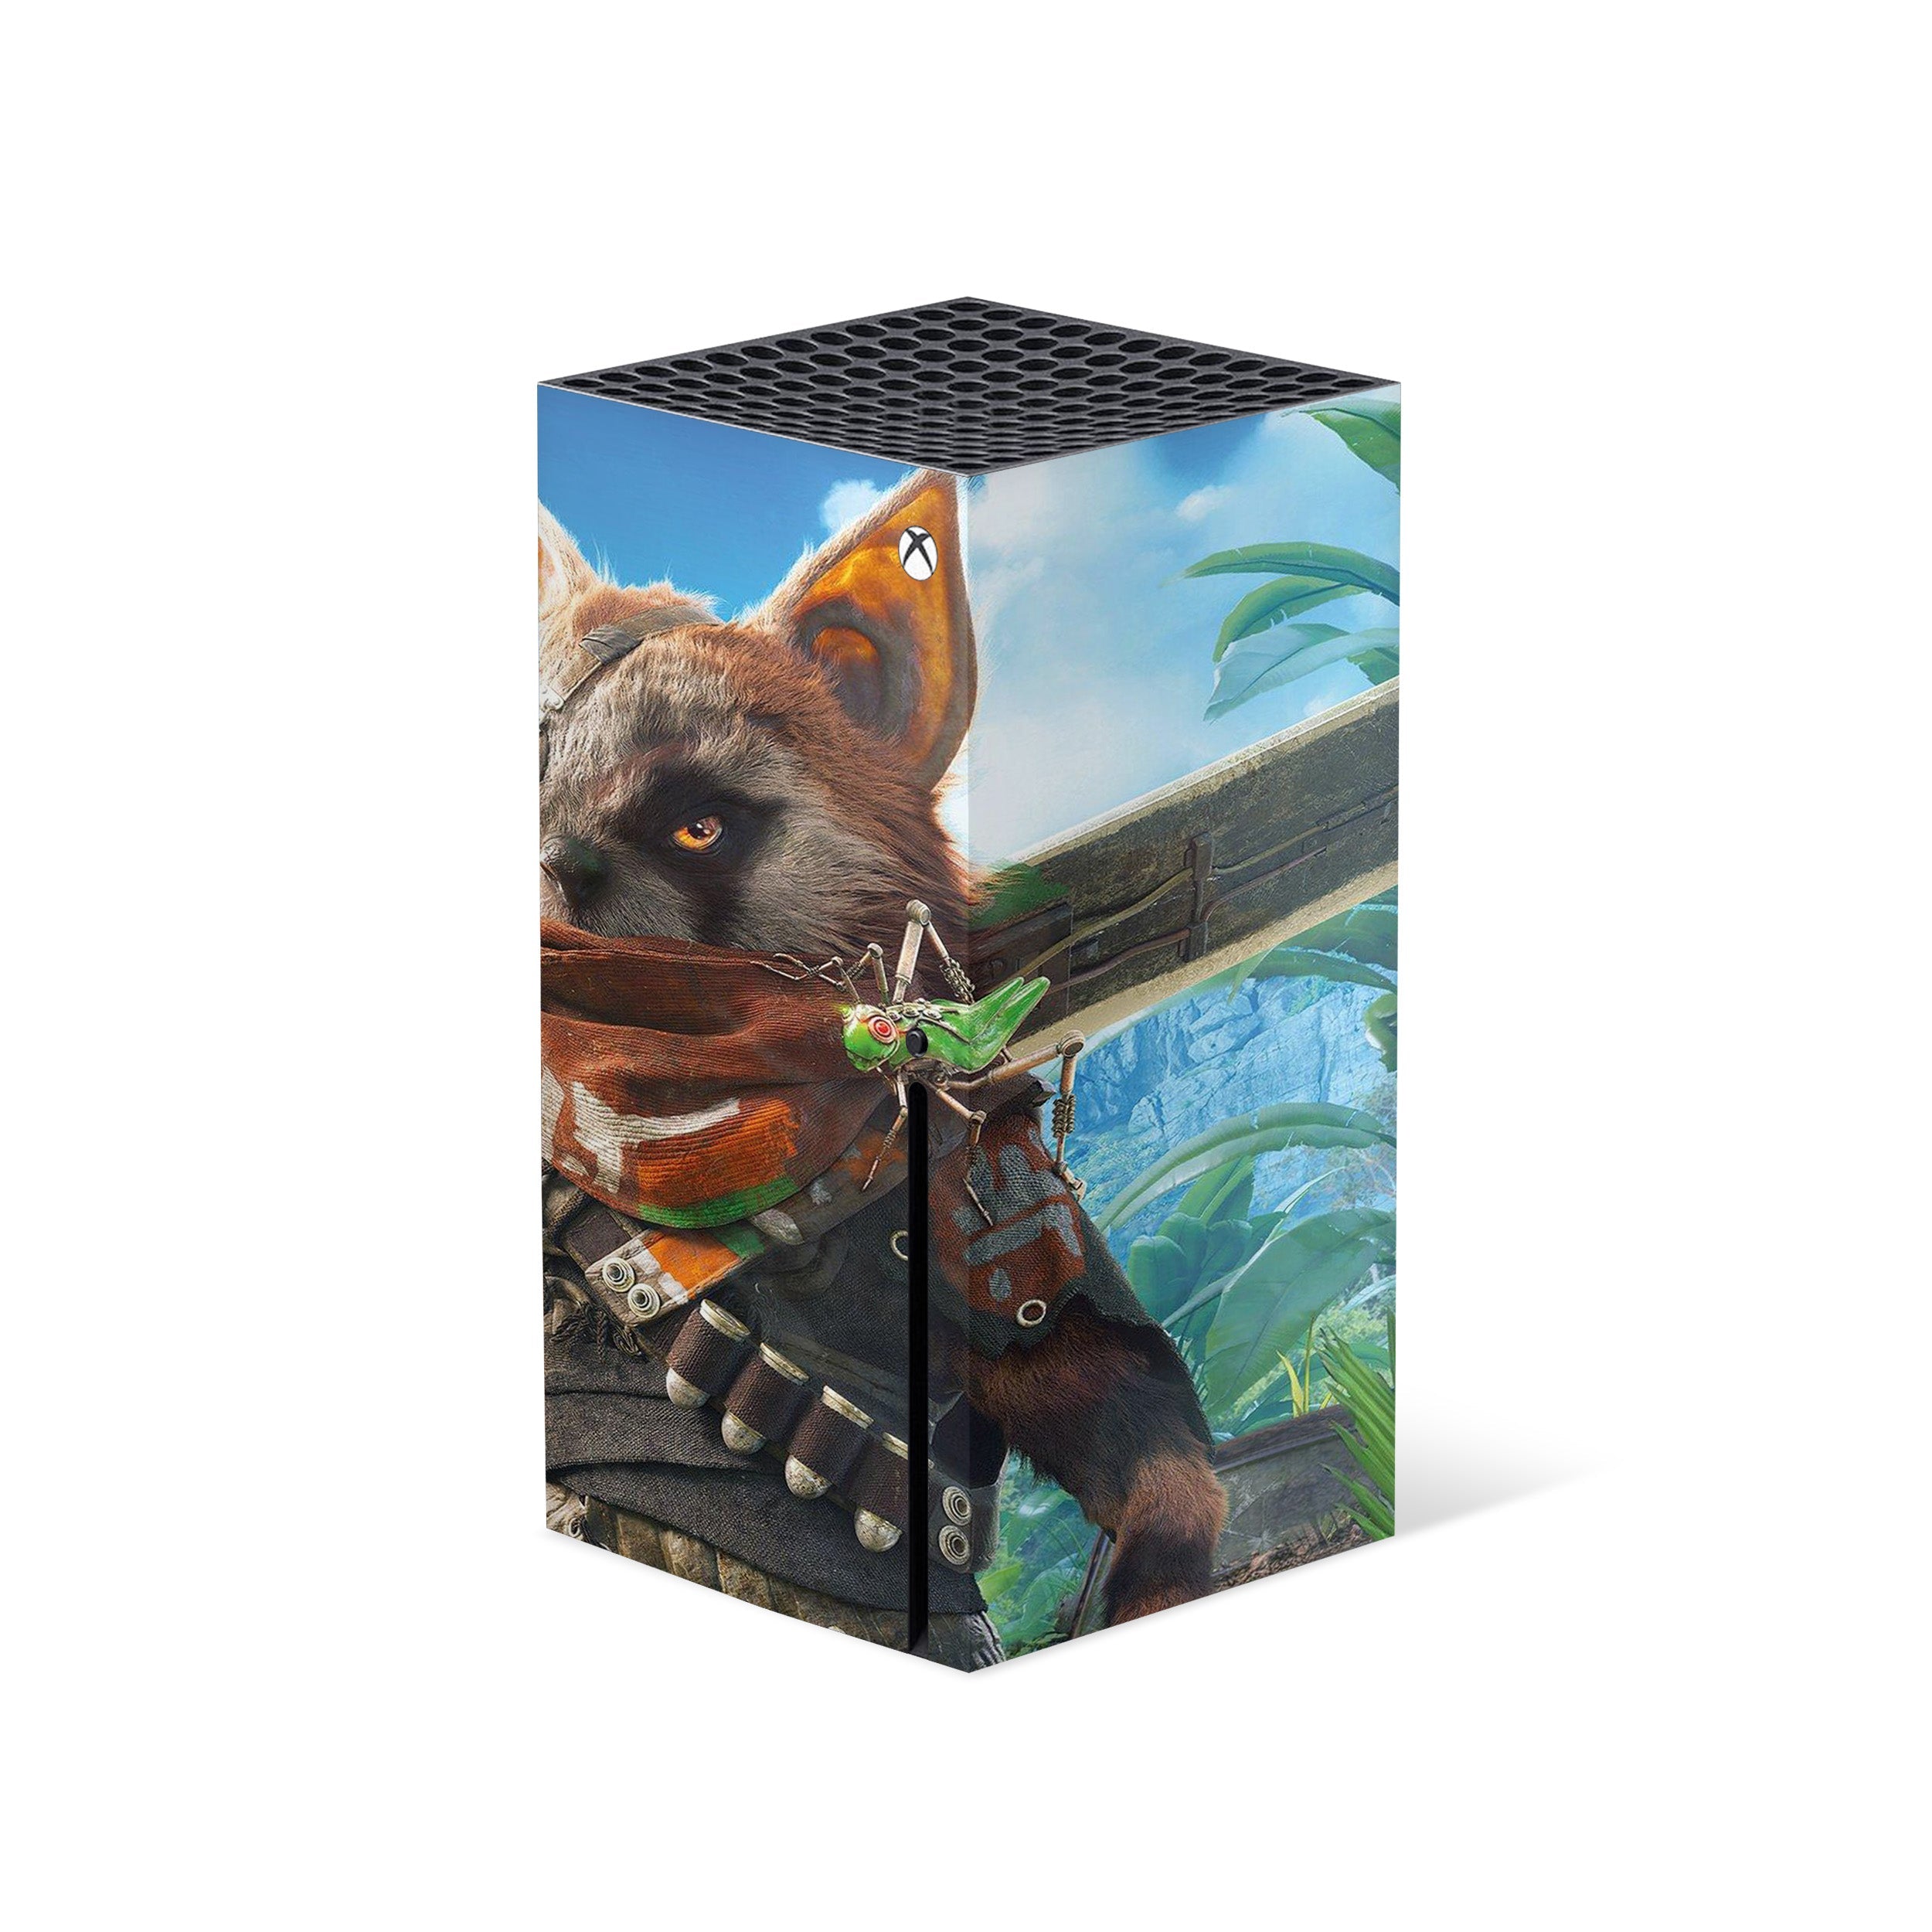 A video game skin featuring a Biomutant design for the Xbox Series X.